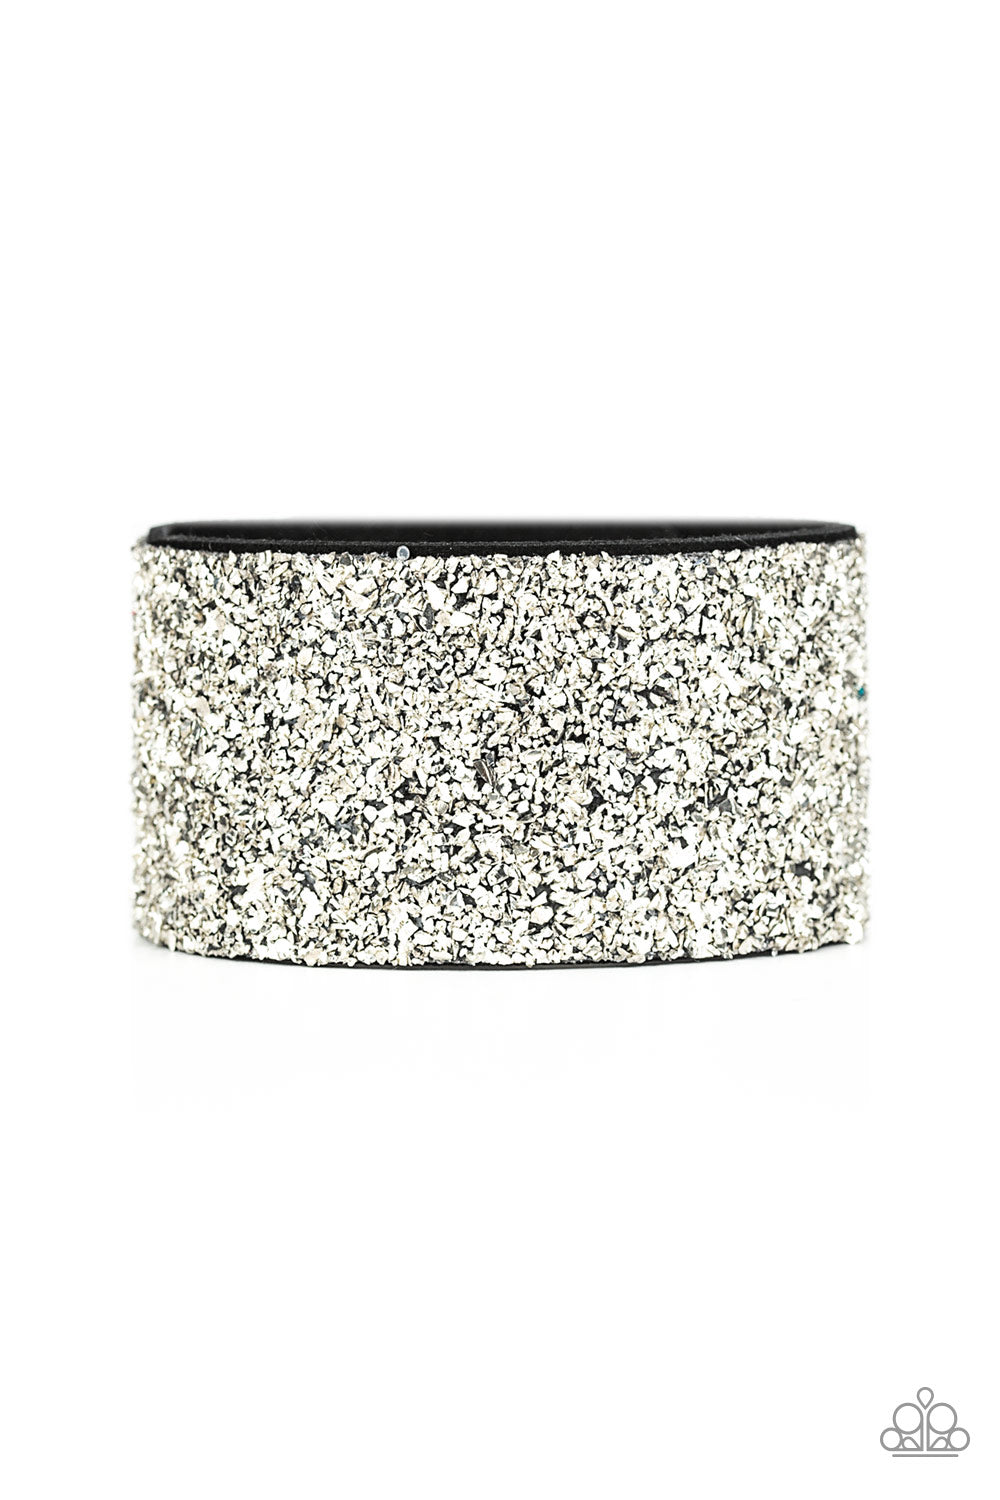 THE HALFTIME SHOW - SILVER LIFE OF THE PARTY CRUSHED DIAMONDS WRAP BRACELET